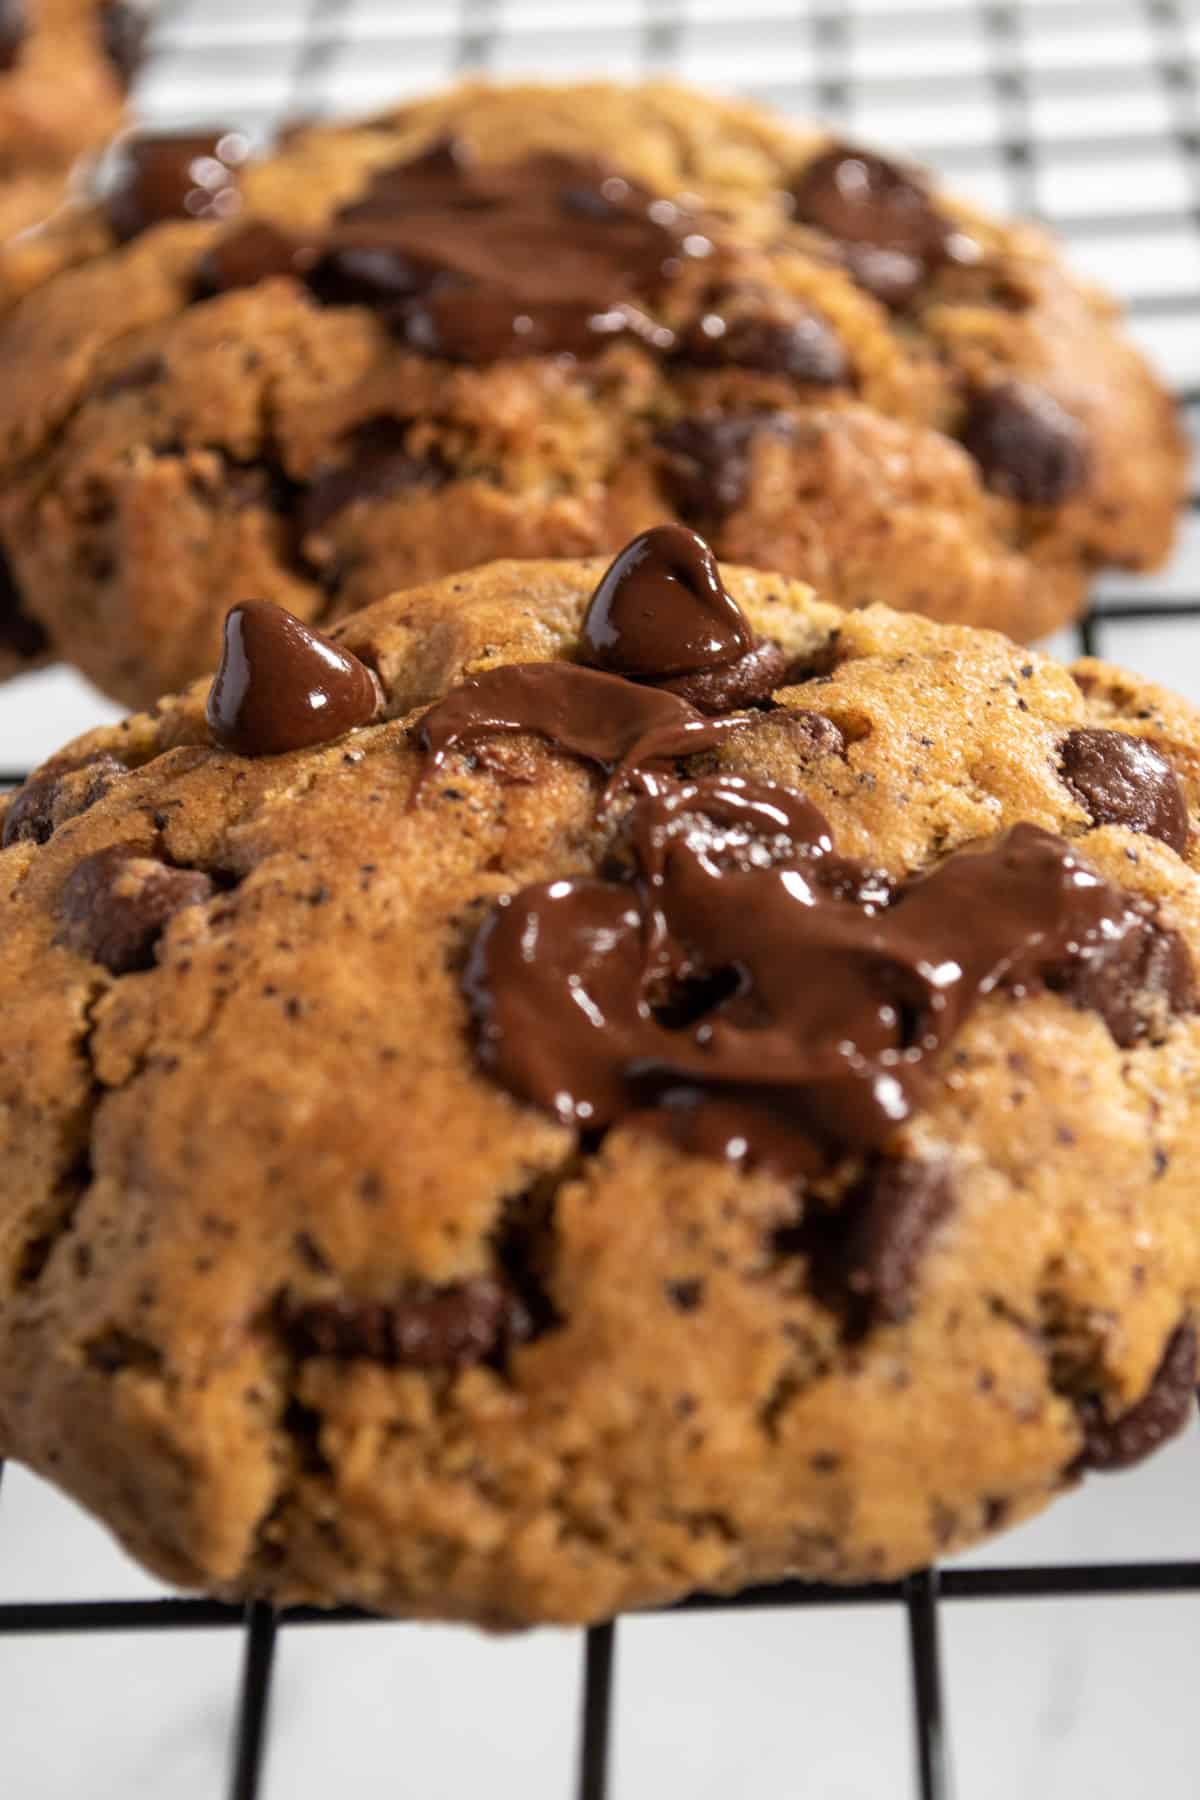 Two large espresso chocolate chip cookies covered with melted chocolate chips on a black wire rack.